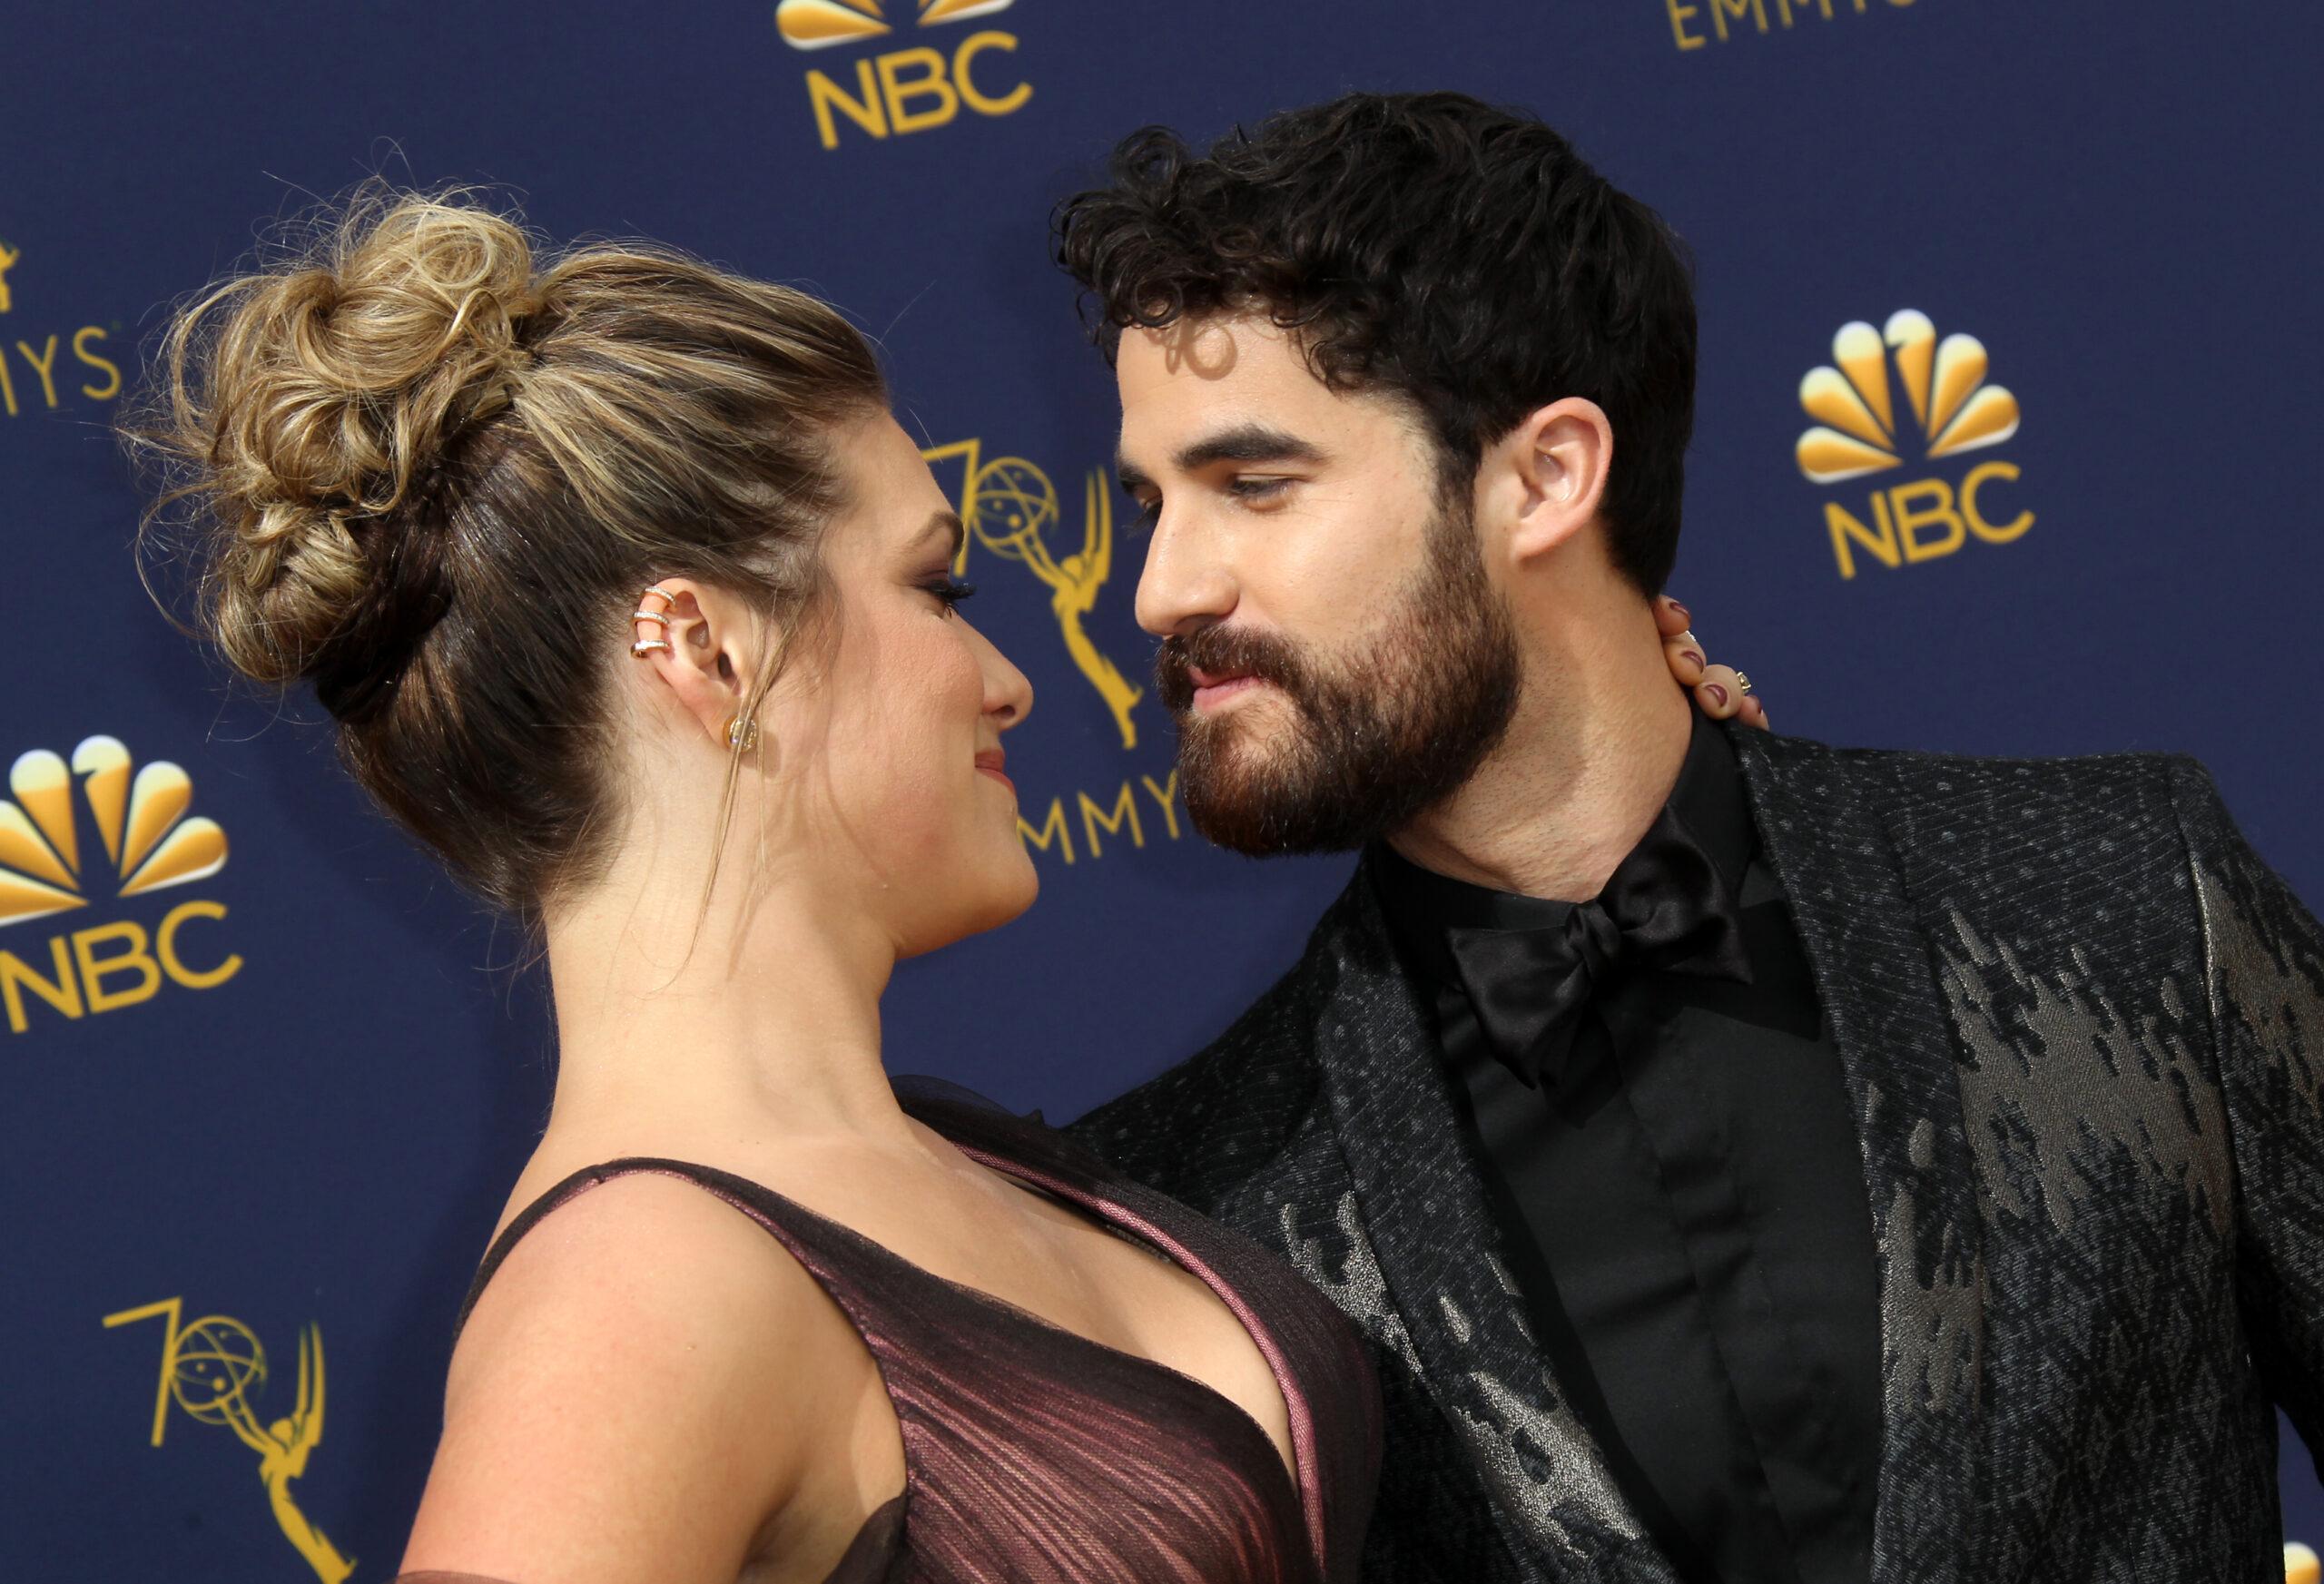 Former 'Glee' star Darren Criss has wed his fiancee Mia Swier in New Orleans (17FEB2019)*** 70th Emmy Awards (2018) Arrivals held at the Microsoft Theater in Los Angeles, California.